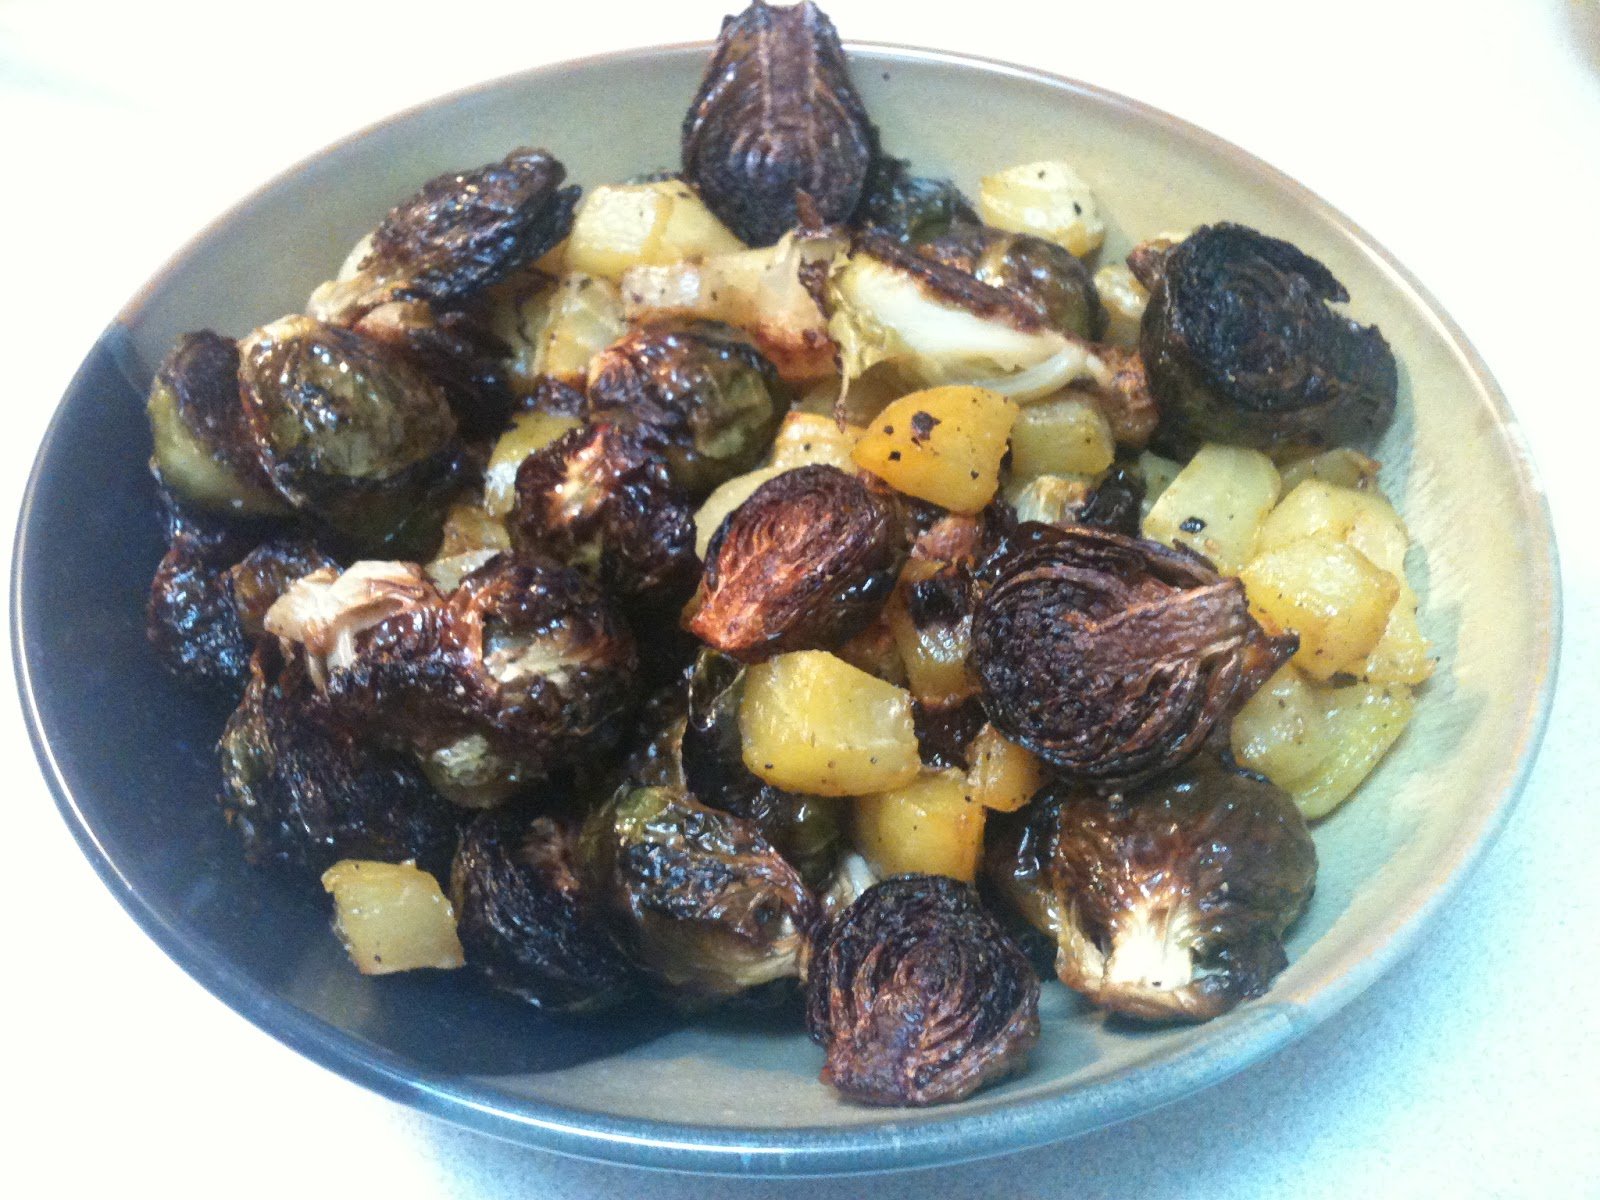 Roasted Brussels Sprouts and Beets